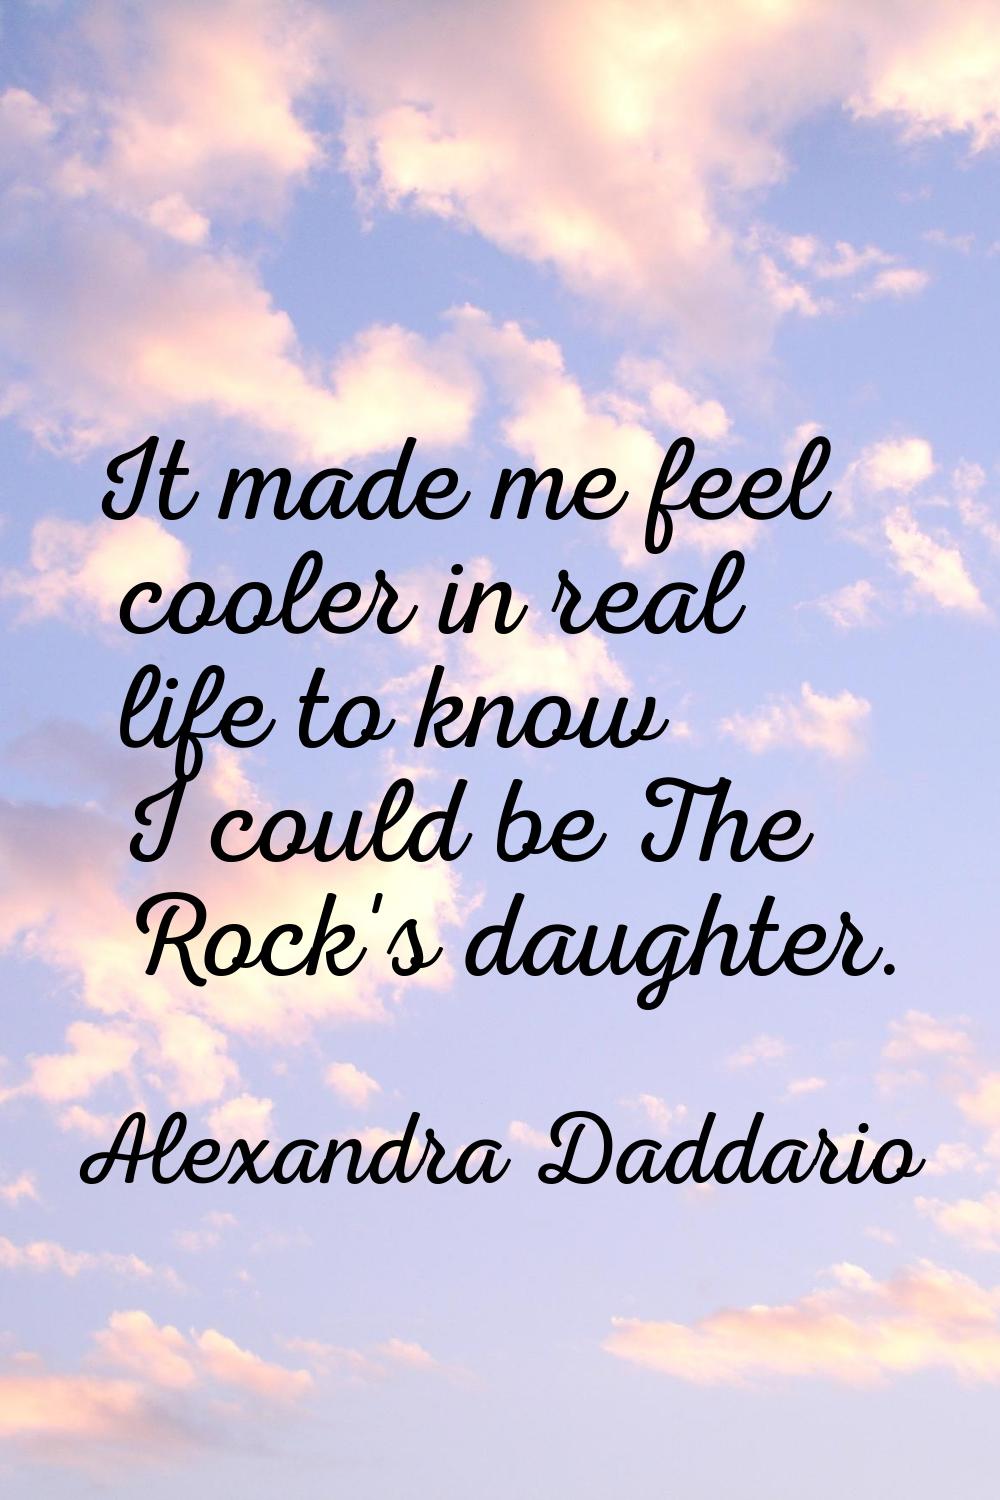 It made me feel cooler in real life to know I could be The Rock's daughter.